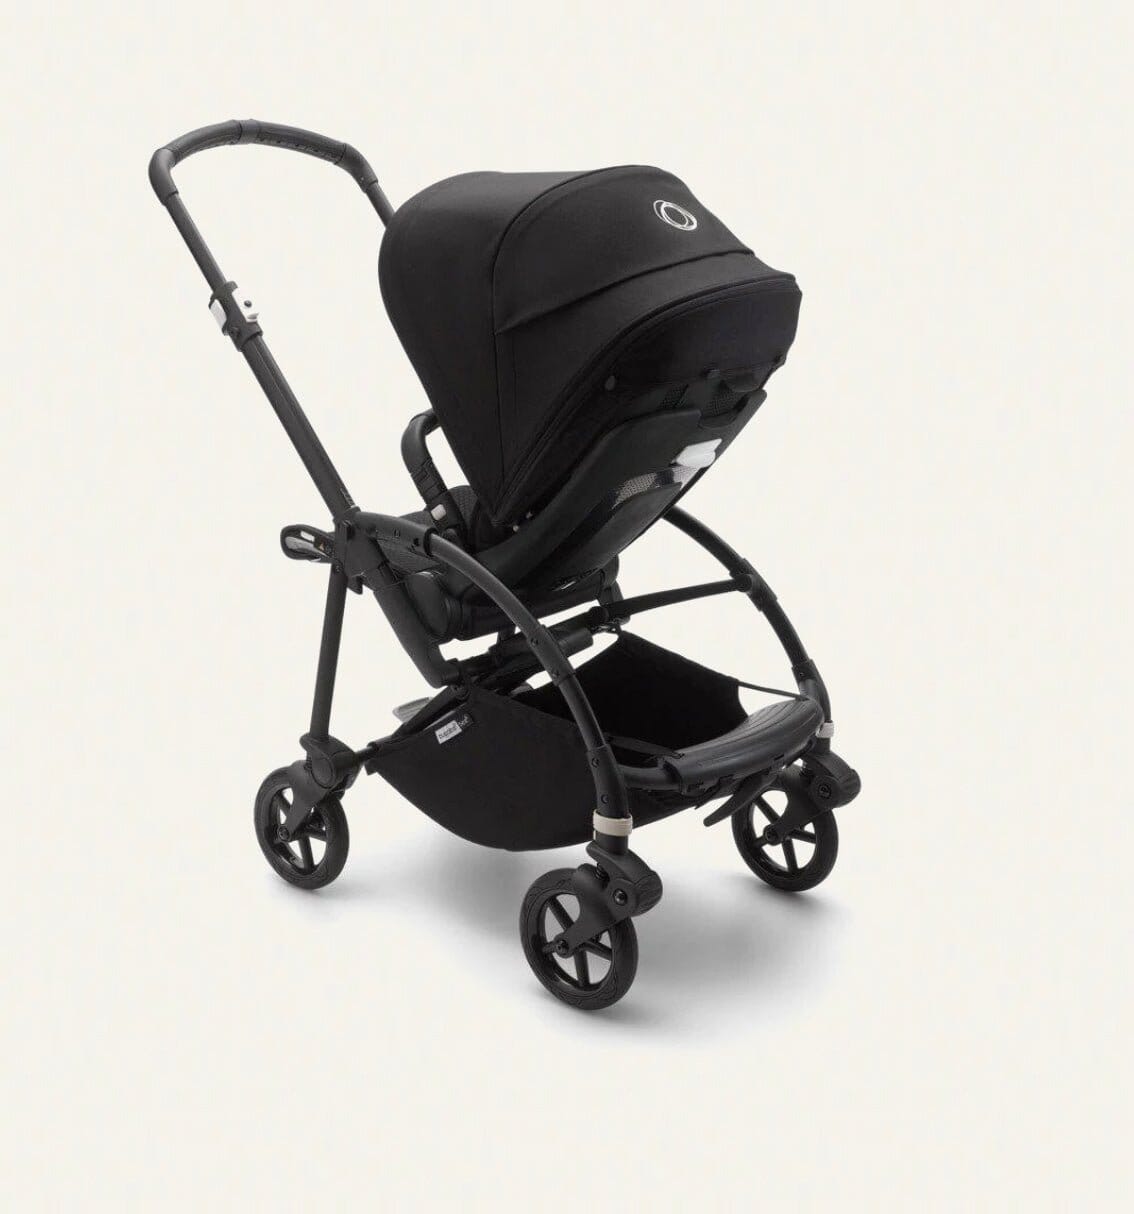 Rent a Bugaboo Bee for just £42 per month on Baboodle